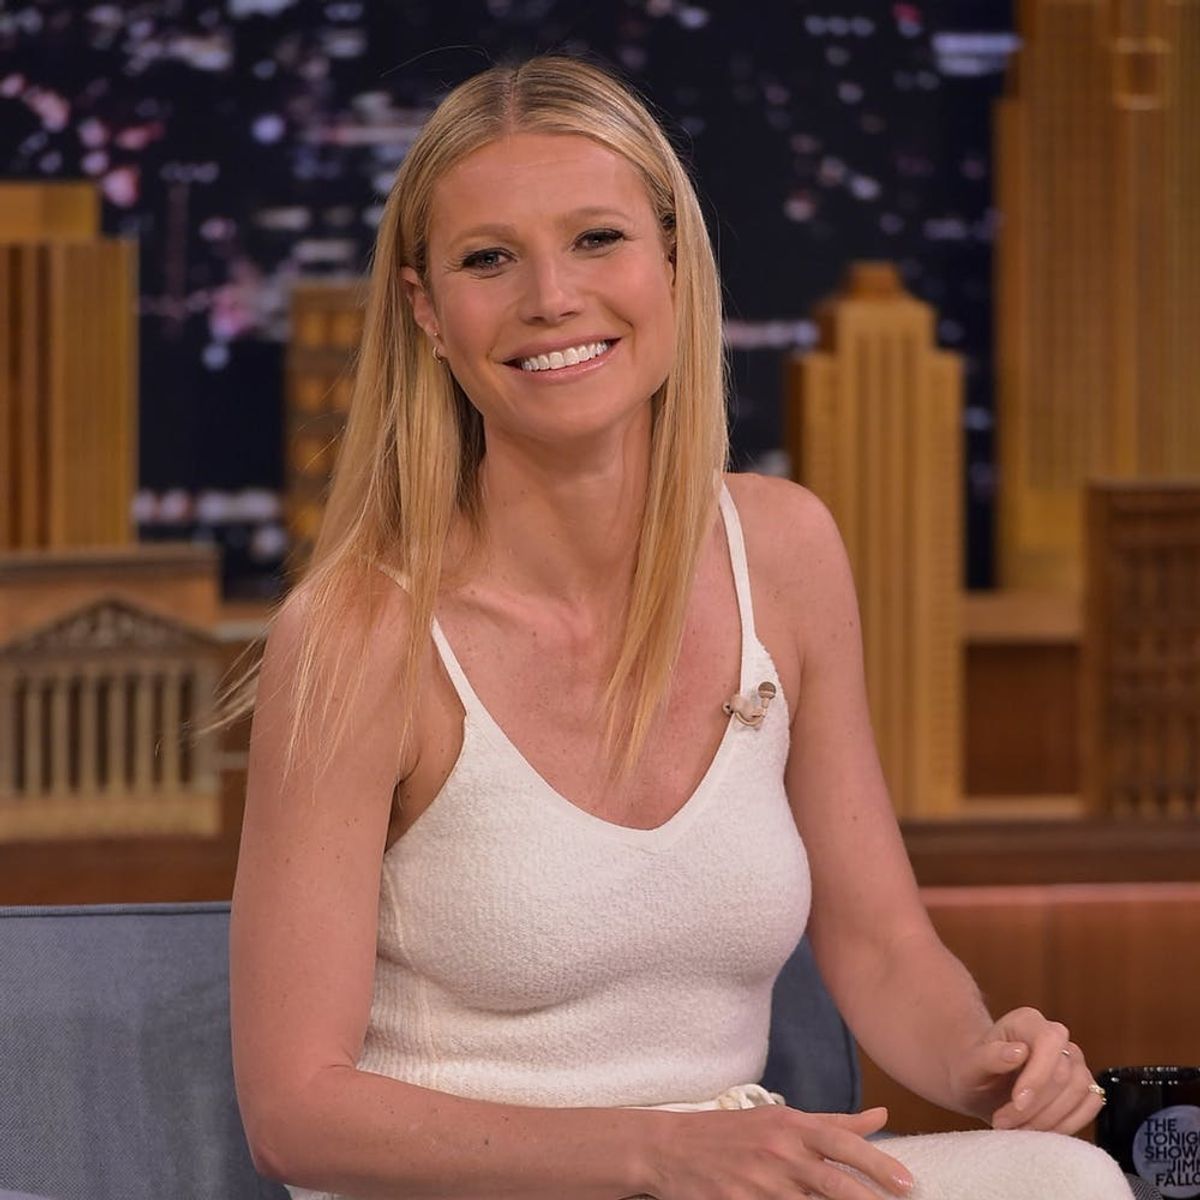 This Pic of Gwyneth Paltrow’s #GirlSquad Is Totally Taylor Swift’s in 10 Years